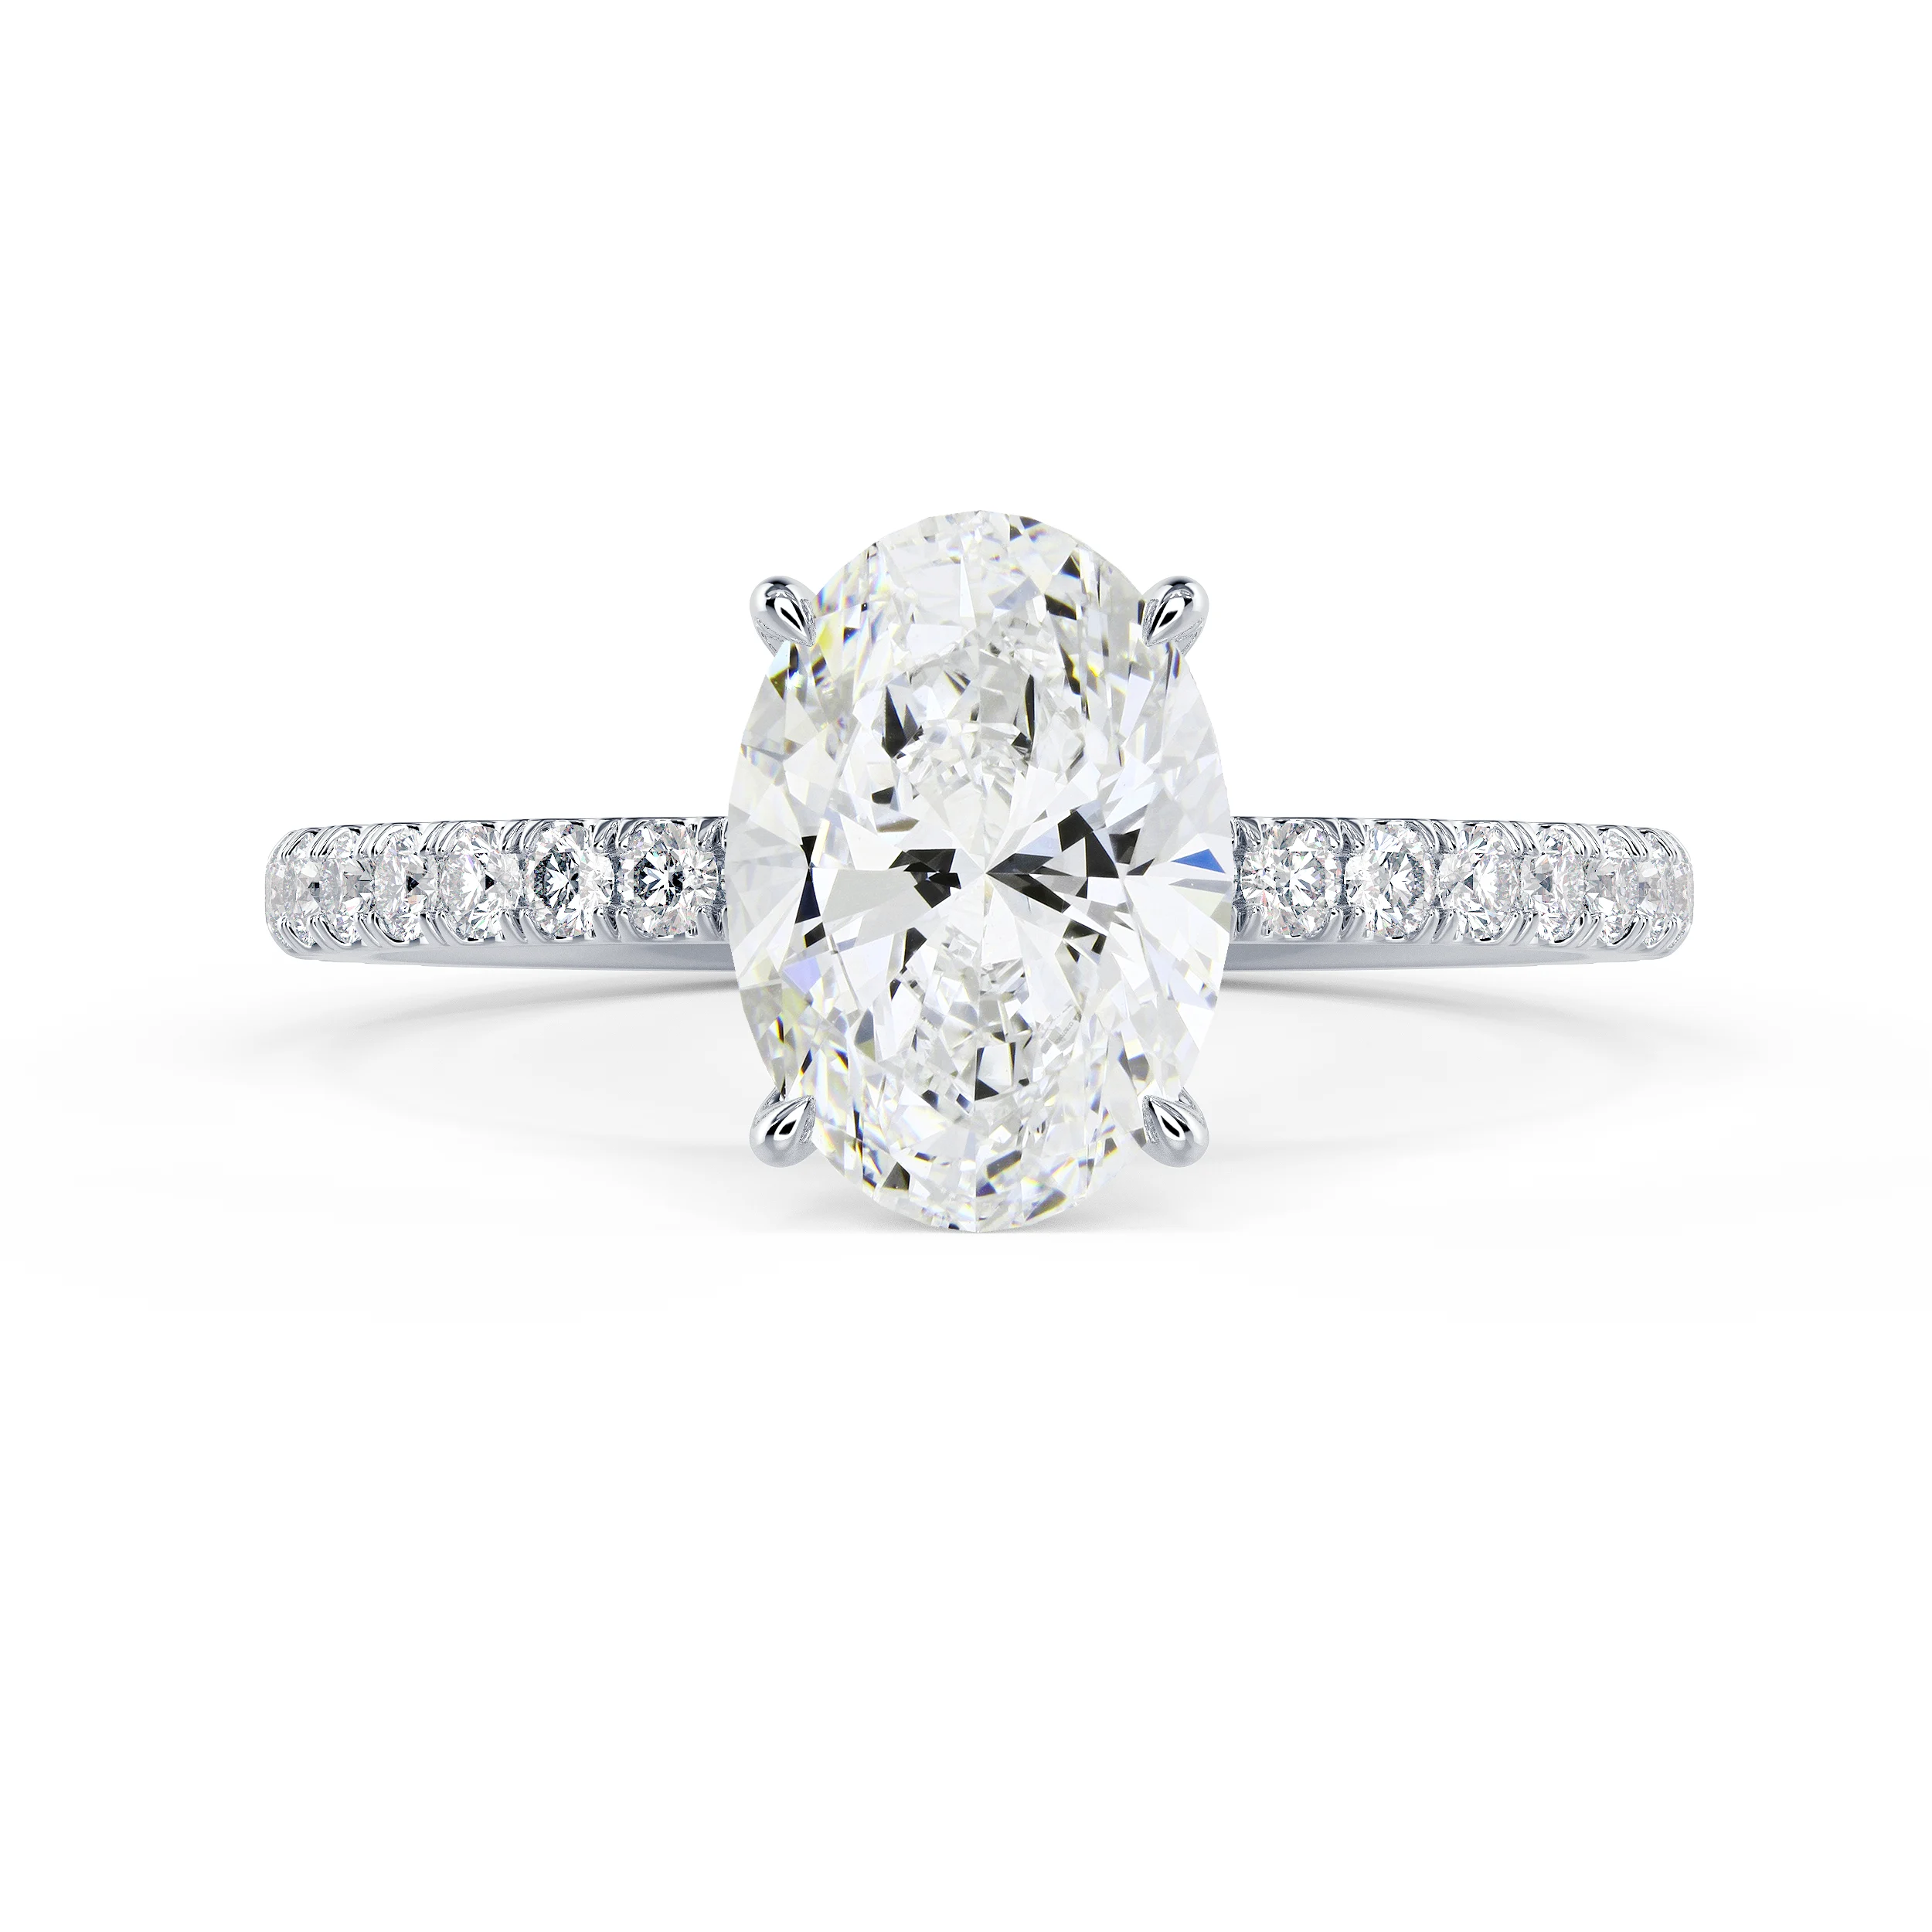 Lab Diamonds set in White Gold Oval Petite Four Prong Pavé Diamond Engagement Ring (Main View)